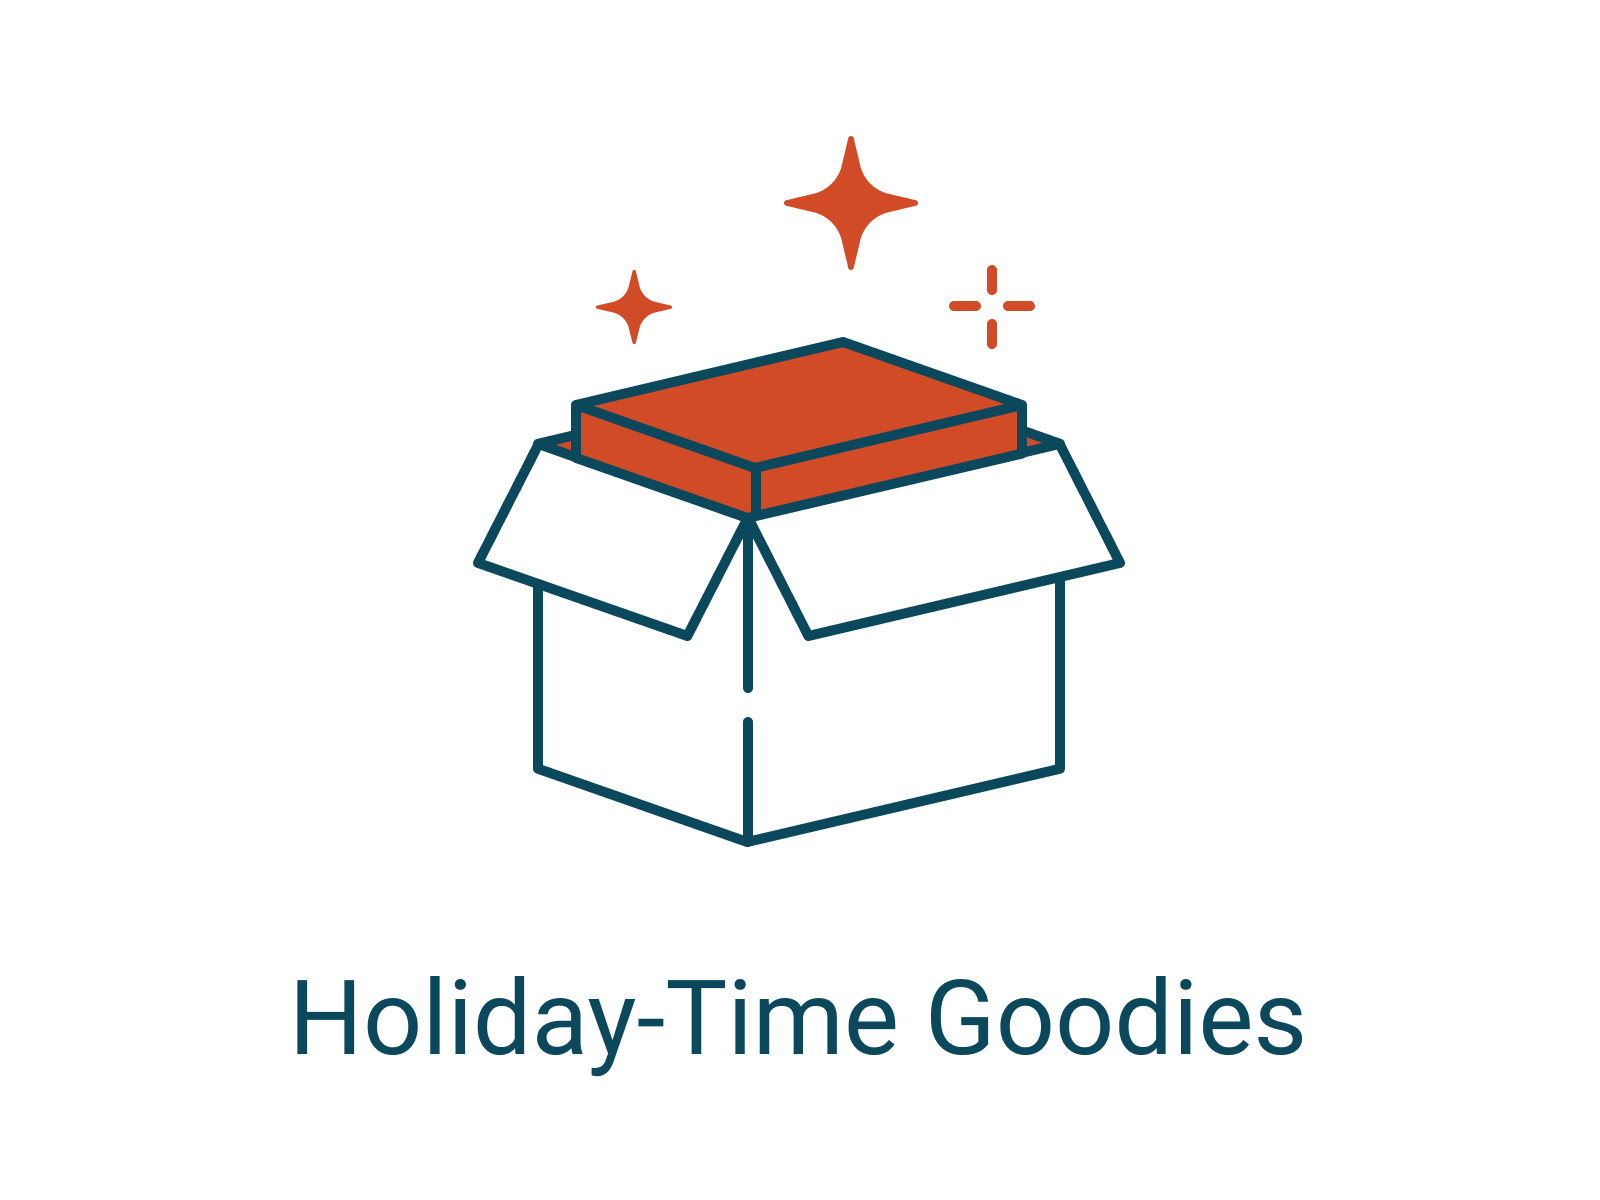 Illustration of an open box with an orange package inside and the words "Holiday-Time Goodies" underneath.